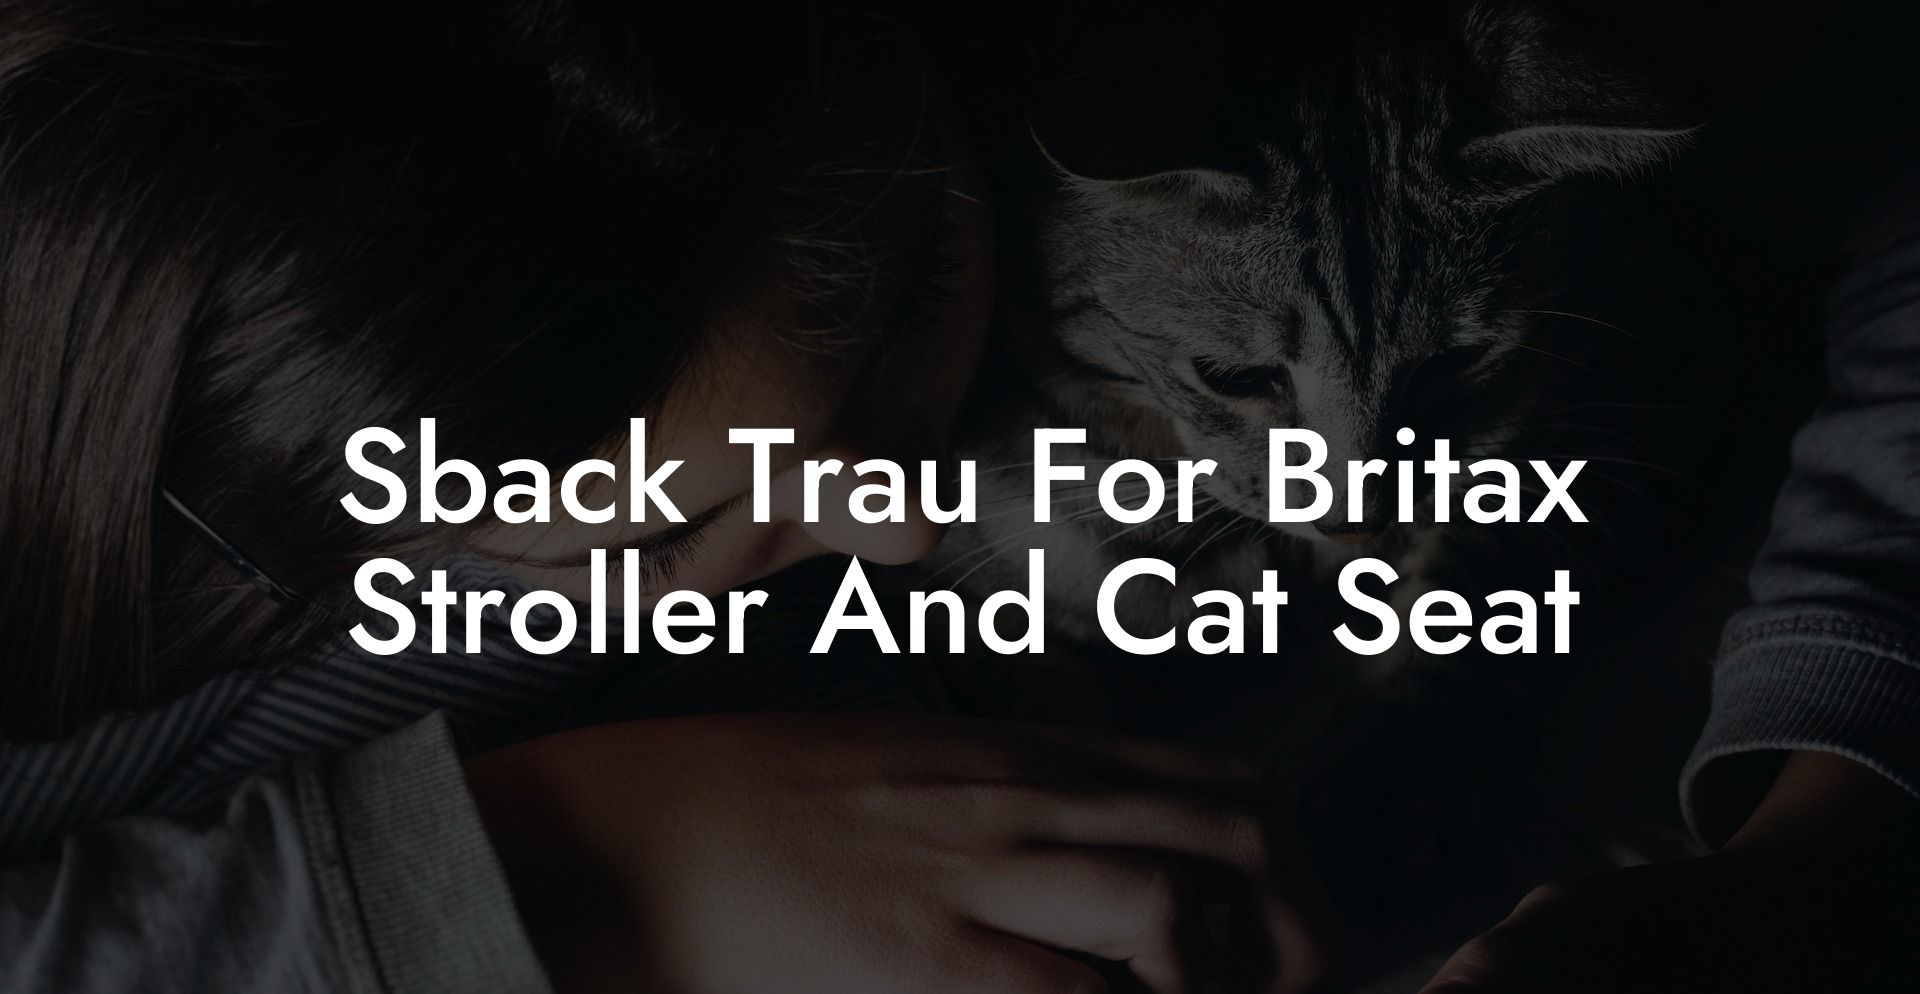 Sback Trau For Britax Stroller And Cat Seat